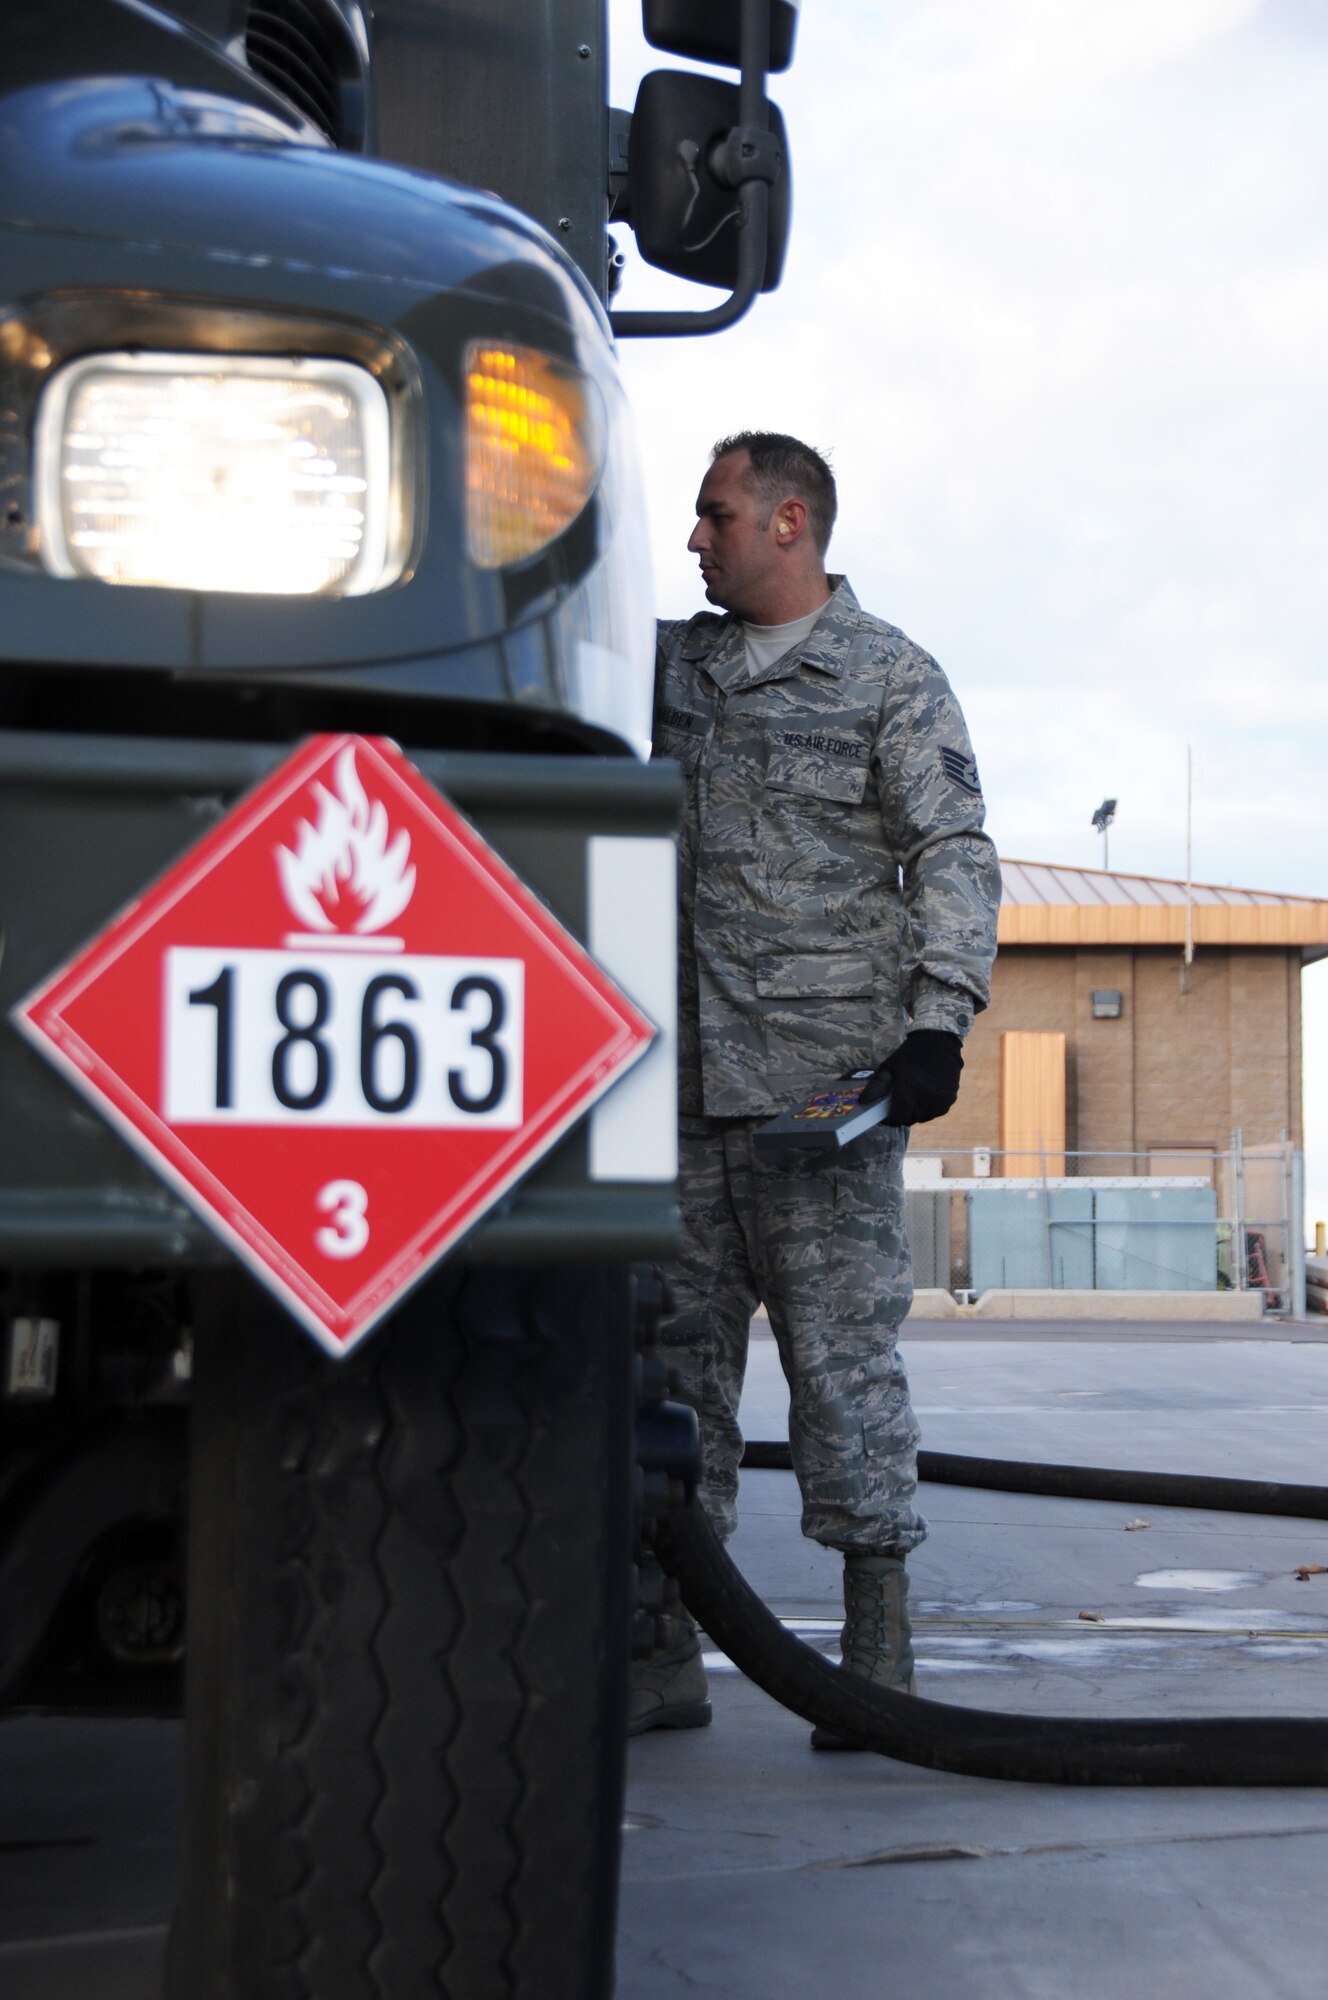 Staff Sgt. Donovan Walden, 161st Logistics Readiness Group fuels technician, monitors the gauges on a fuel truck as part of a routine inspection during an aircraft generation exercise, Phoenix, Nov. 5, 2011. In order to maintain safety on the flightline, these six thousand gallon fuel trucks are inspected daily for leaks and cracks in the pipes. (U.S. Air Force Photo by Staff Sgt. Courtney Enos/Released)